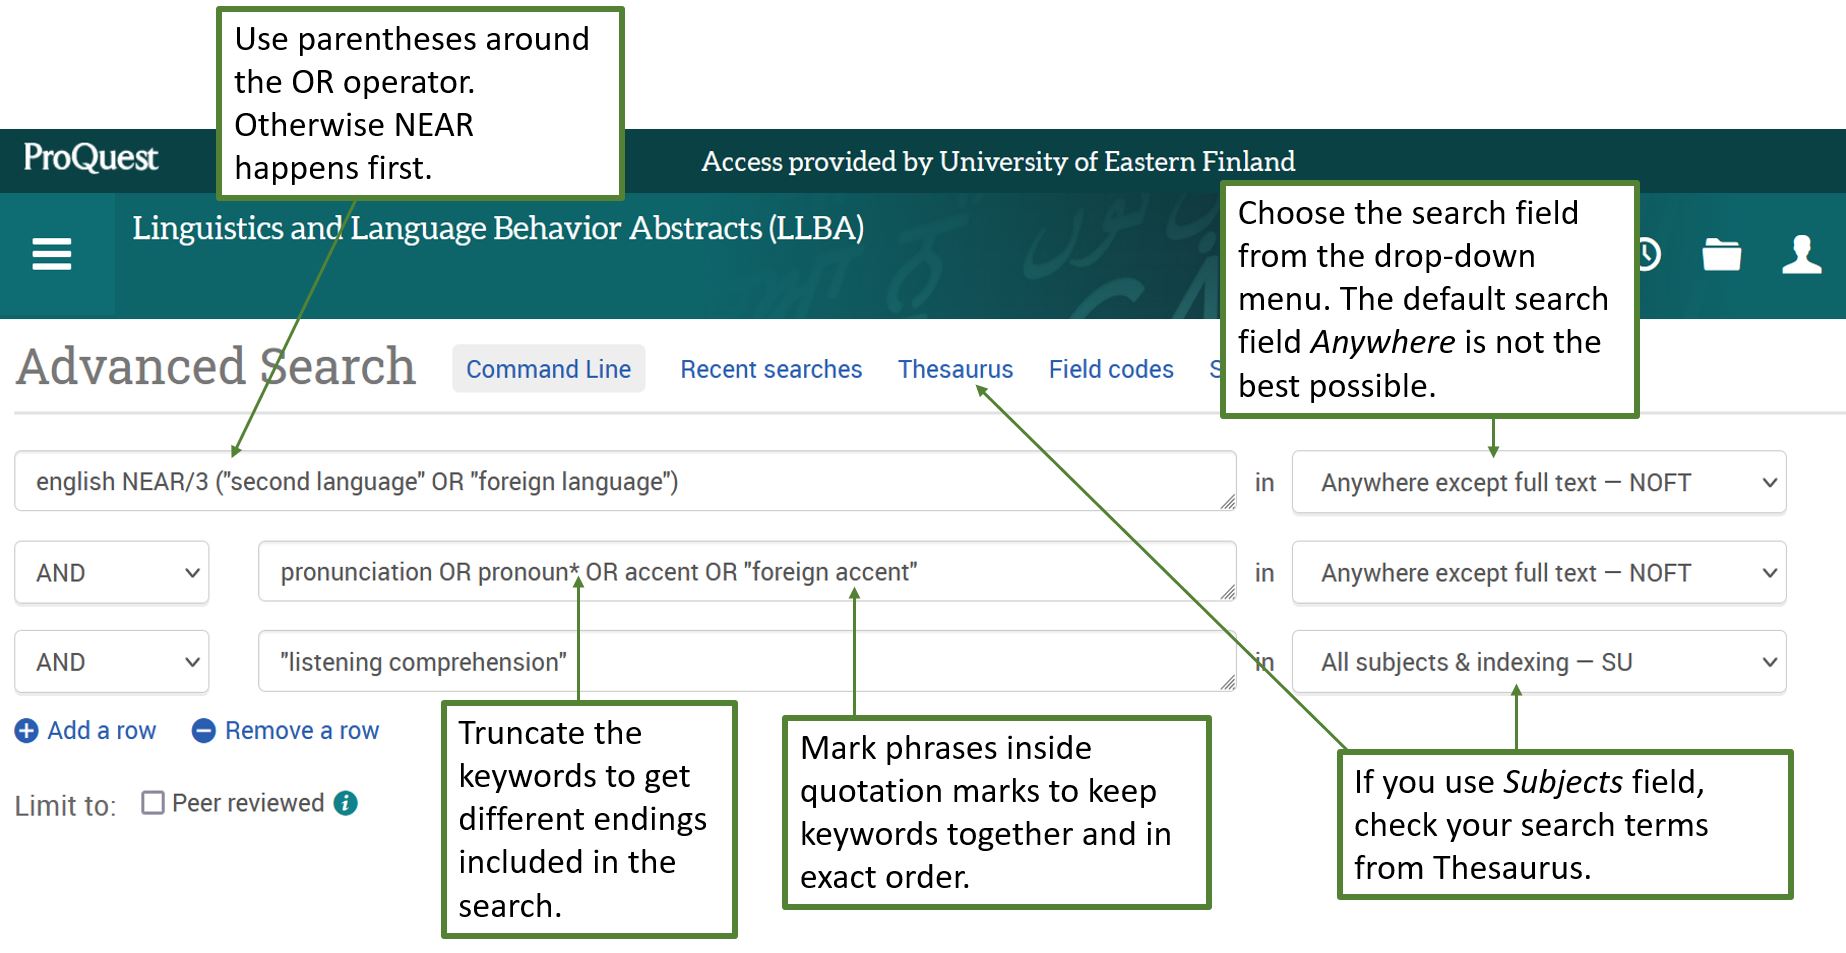 Linguistics and Language Behavior Abstracts database and its advanced search form with some hints. Choose the search field from the drop-down menu. The default search field "Anywhere" is not the best possible. If you use "Subjects" field, check your search terms from the databases own thesaurus. Mark phrases inside quotation marks. Truncate the keywords with asterisk to get different endings.